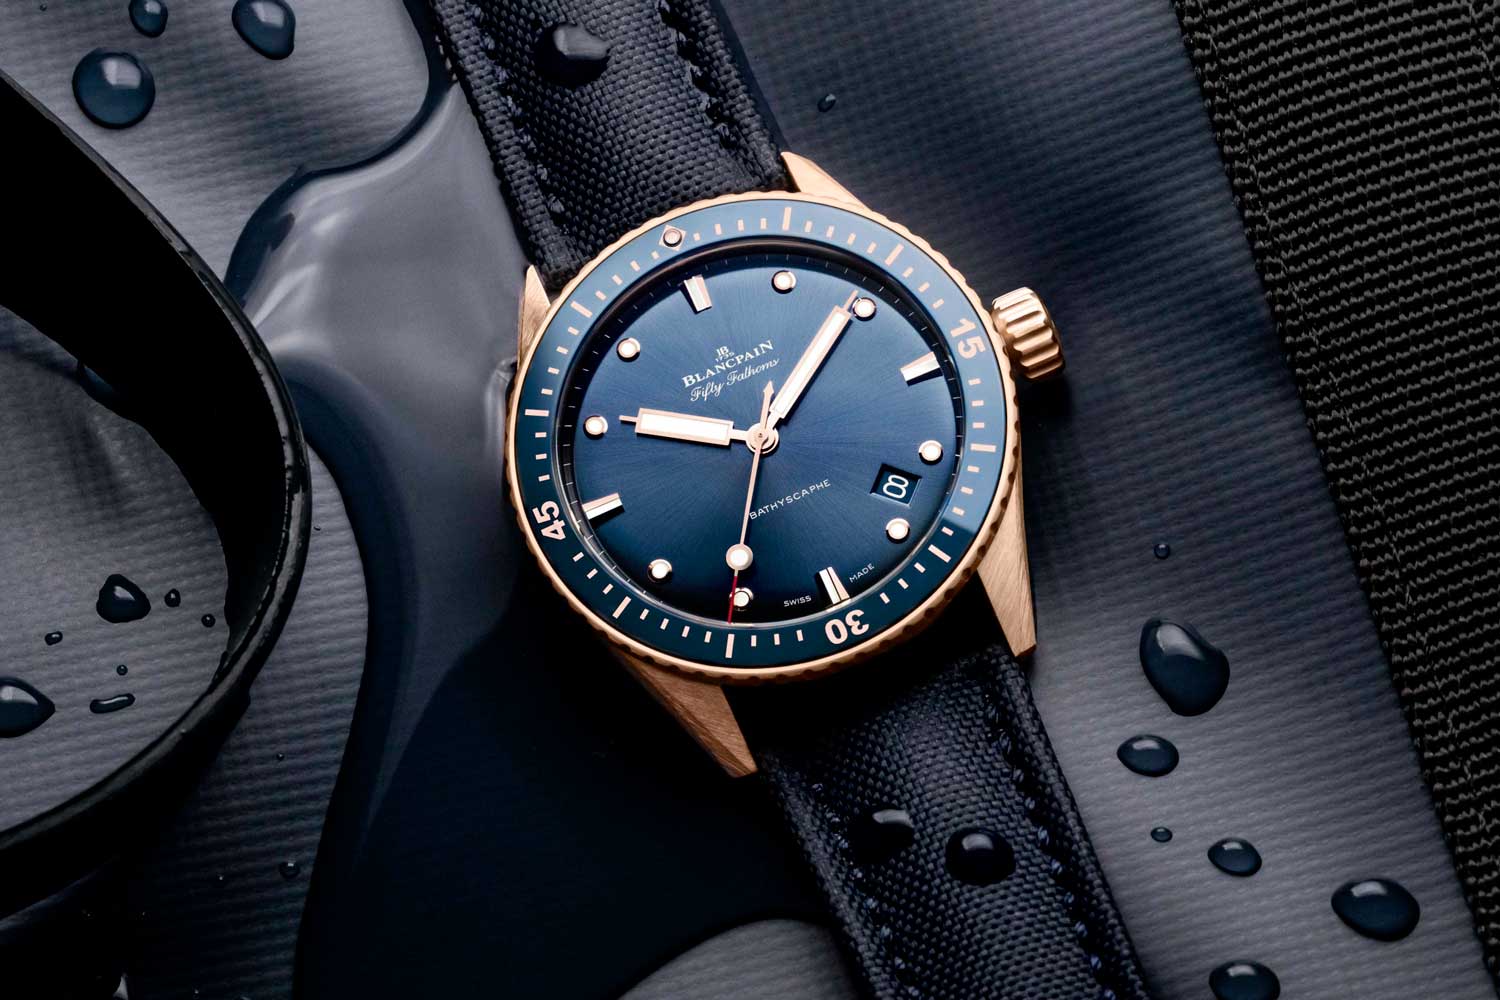 The Fifty Fathoms Bathyscaphe (Blue in Sedna Gold)